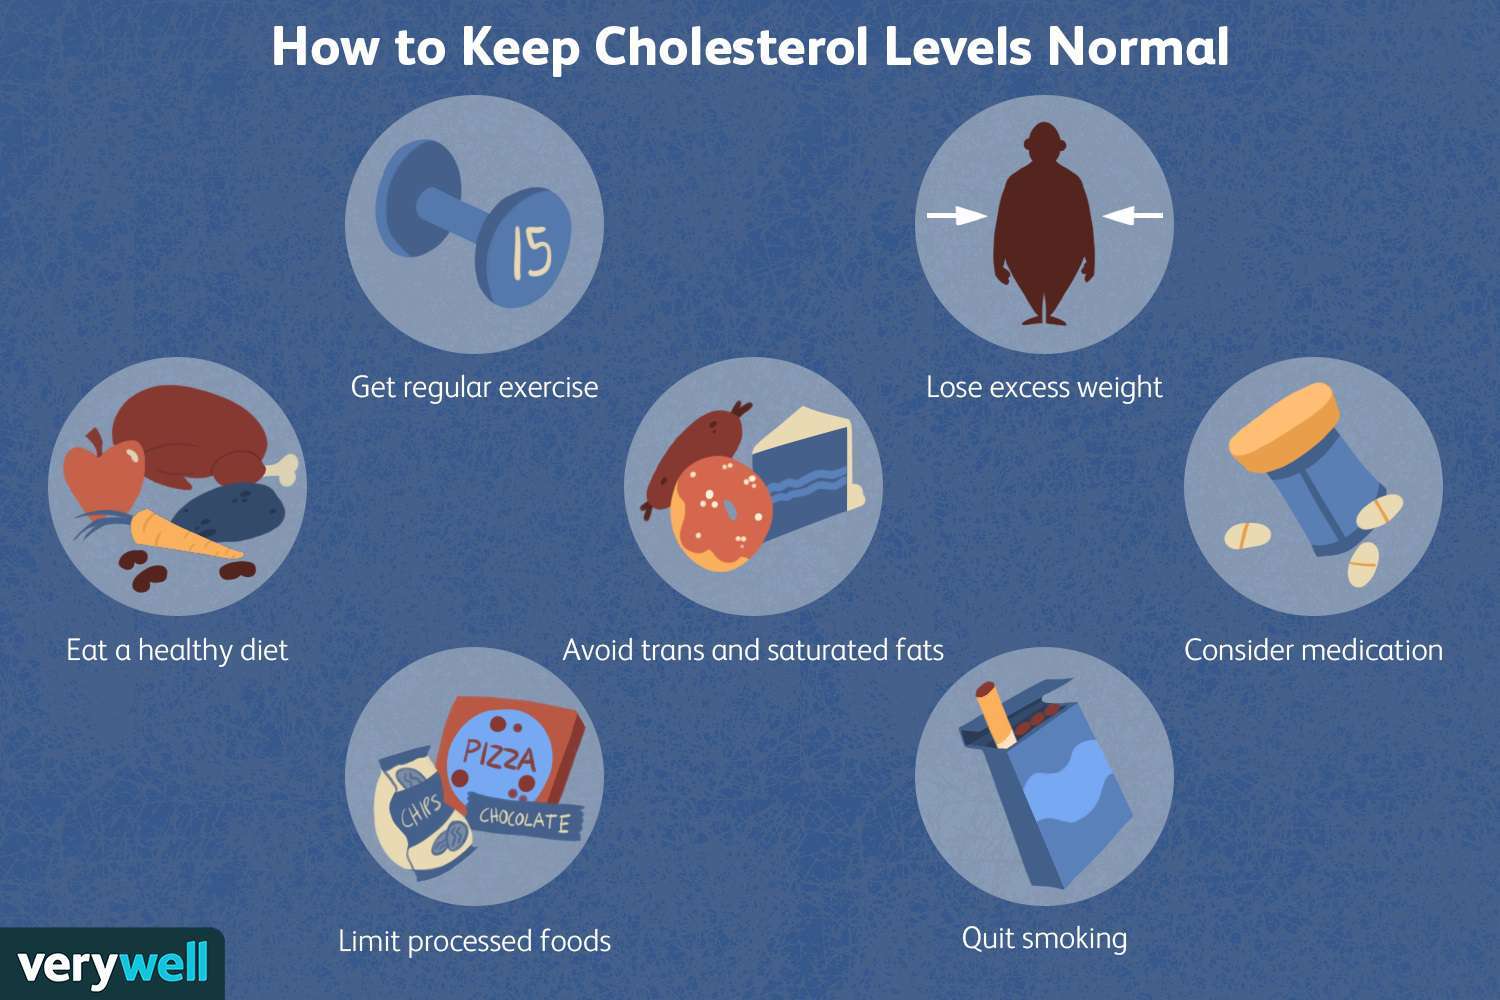 Can Your Cholesterol Level Be Too Low?